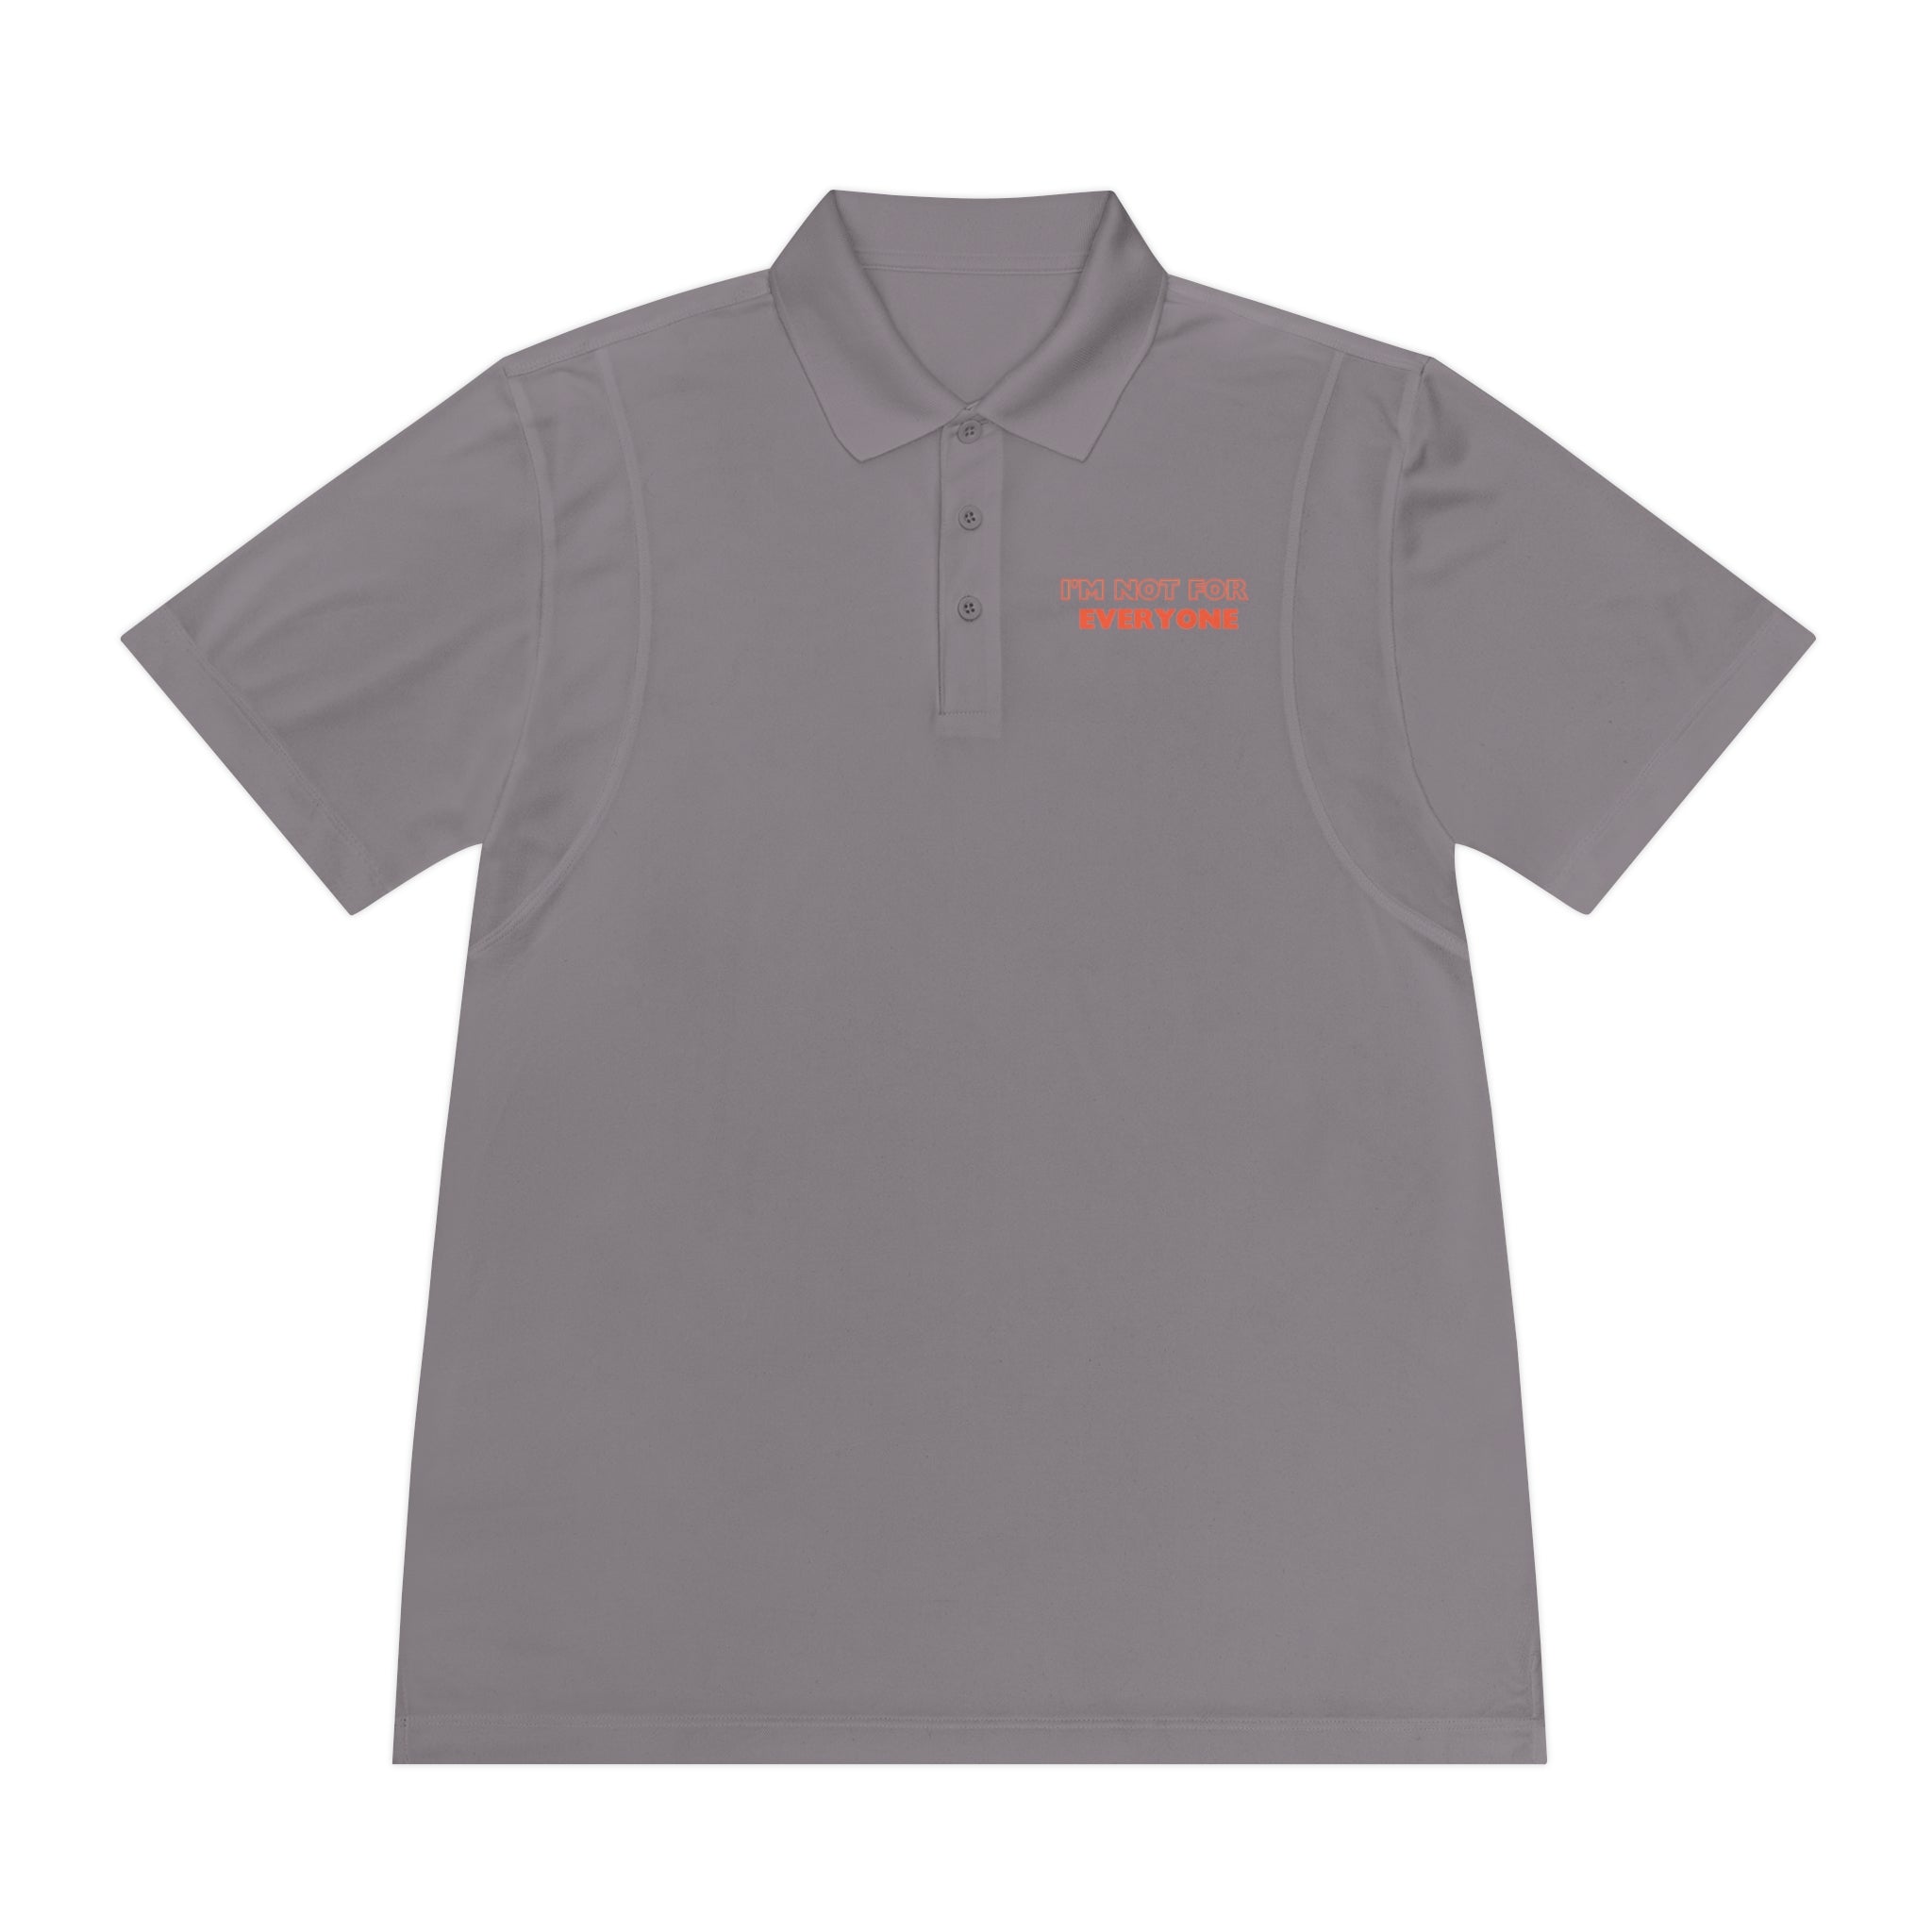 I&#39;m Not For Everyone | Men&#39;s Sport Polo Shirt